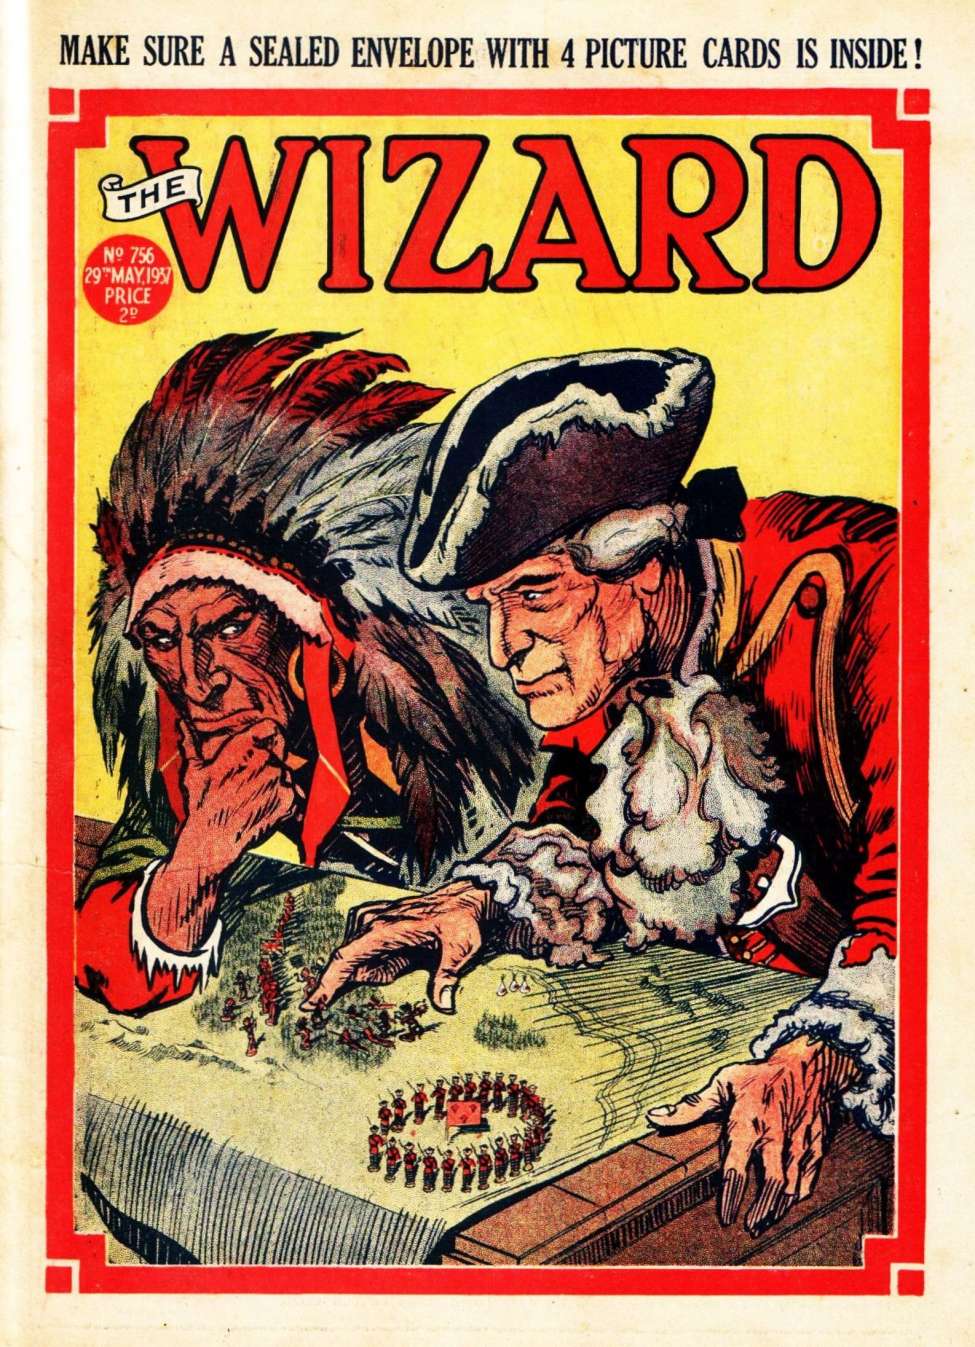 The Wizard 756 (The Wizard) Comic Book Plus